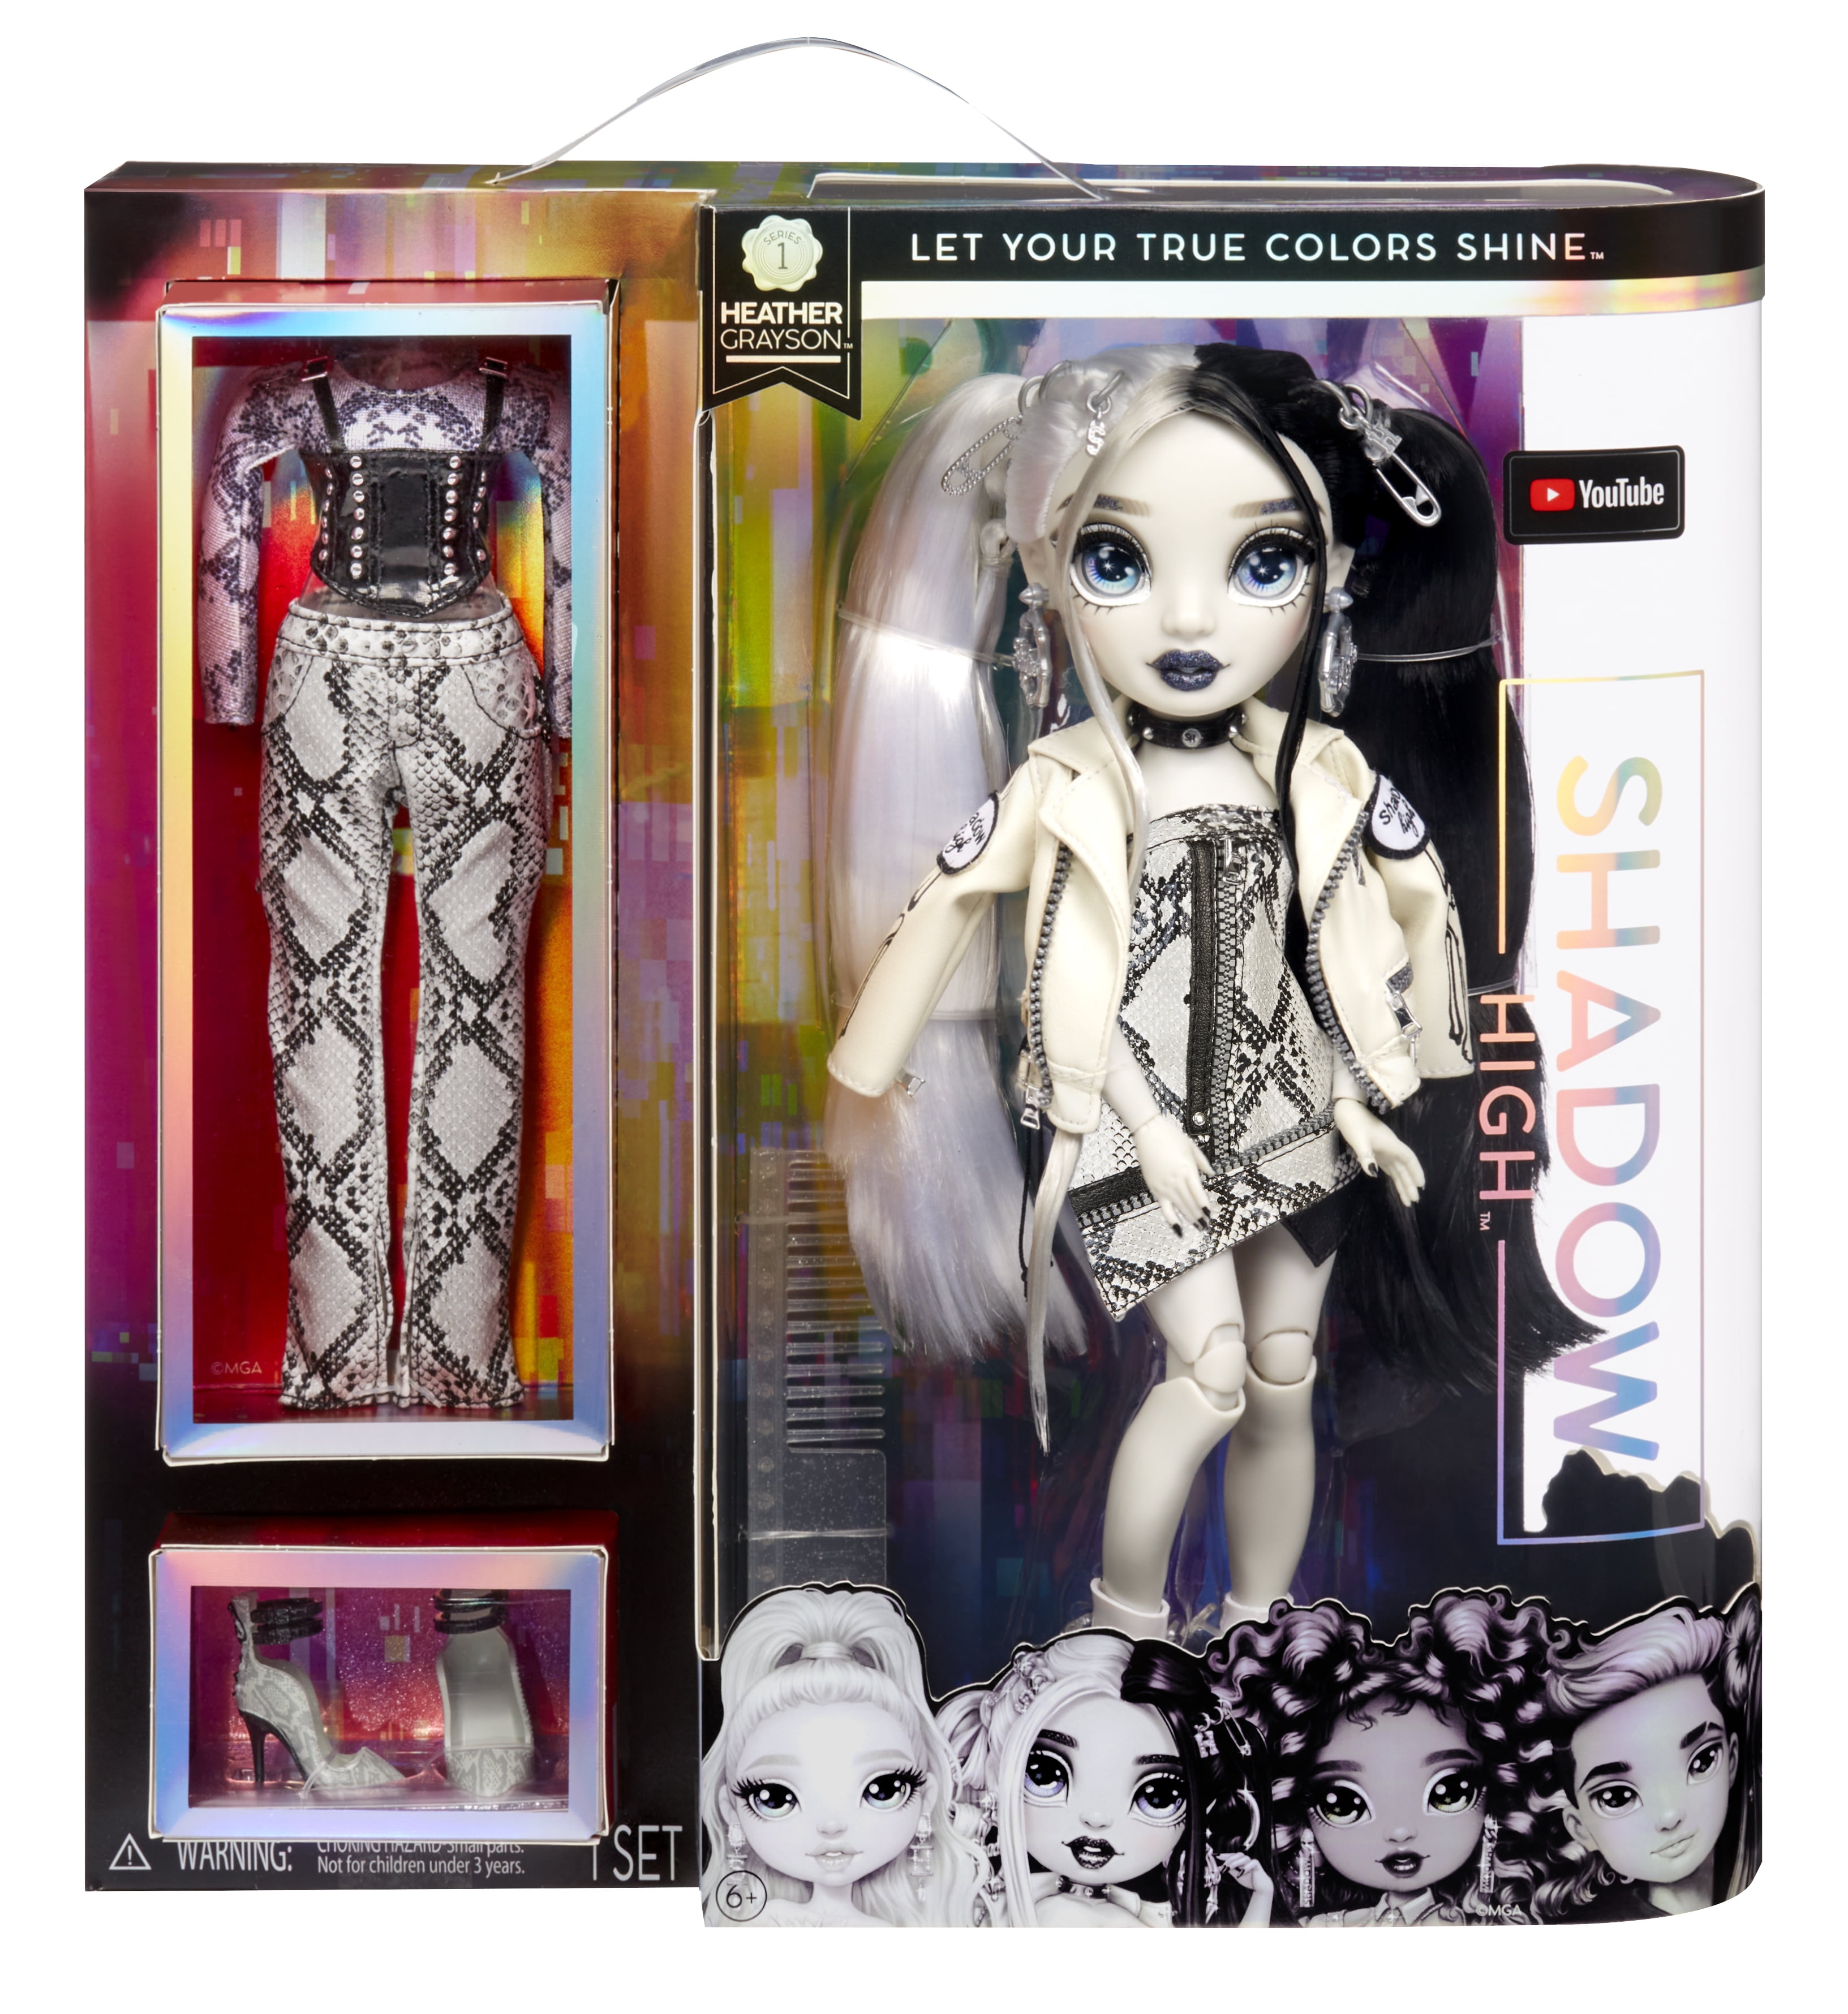 Shadow High Series 1 Heather Grayson- Grayscale Fashion Doll. 2 Grey Designer Outfits to Mix & Match with Accessories, Great Gift for Kids 6-12 Years Old and Collectors